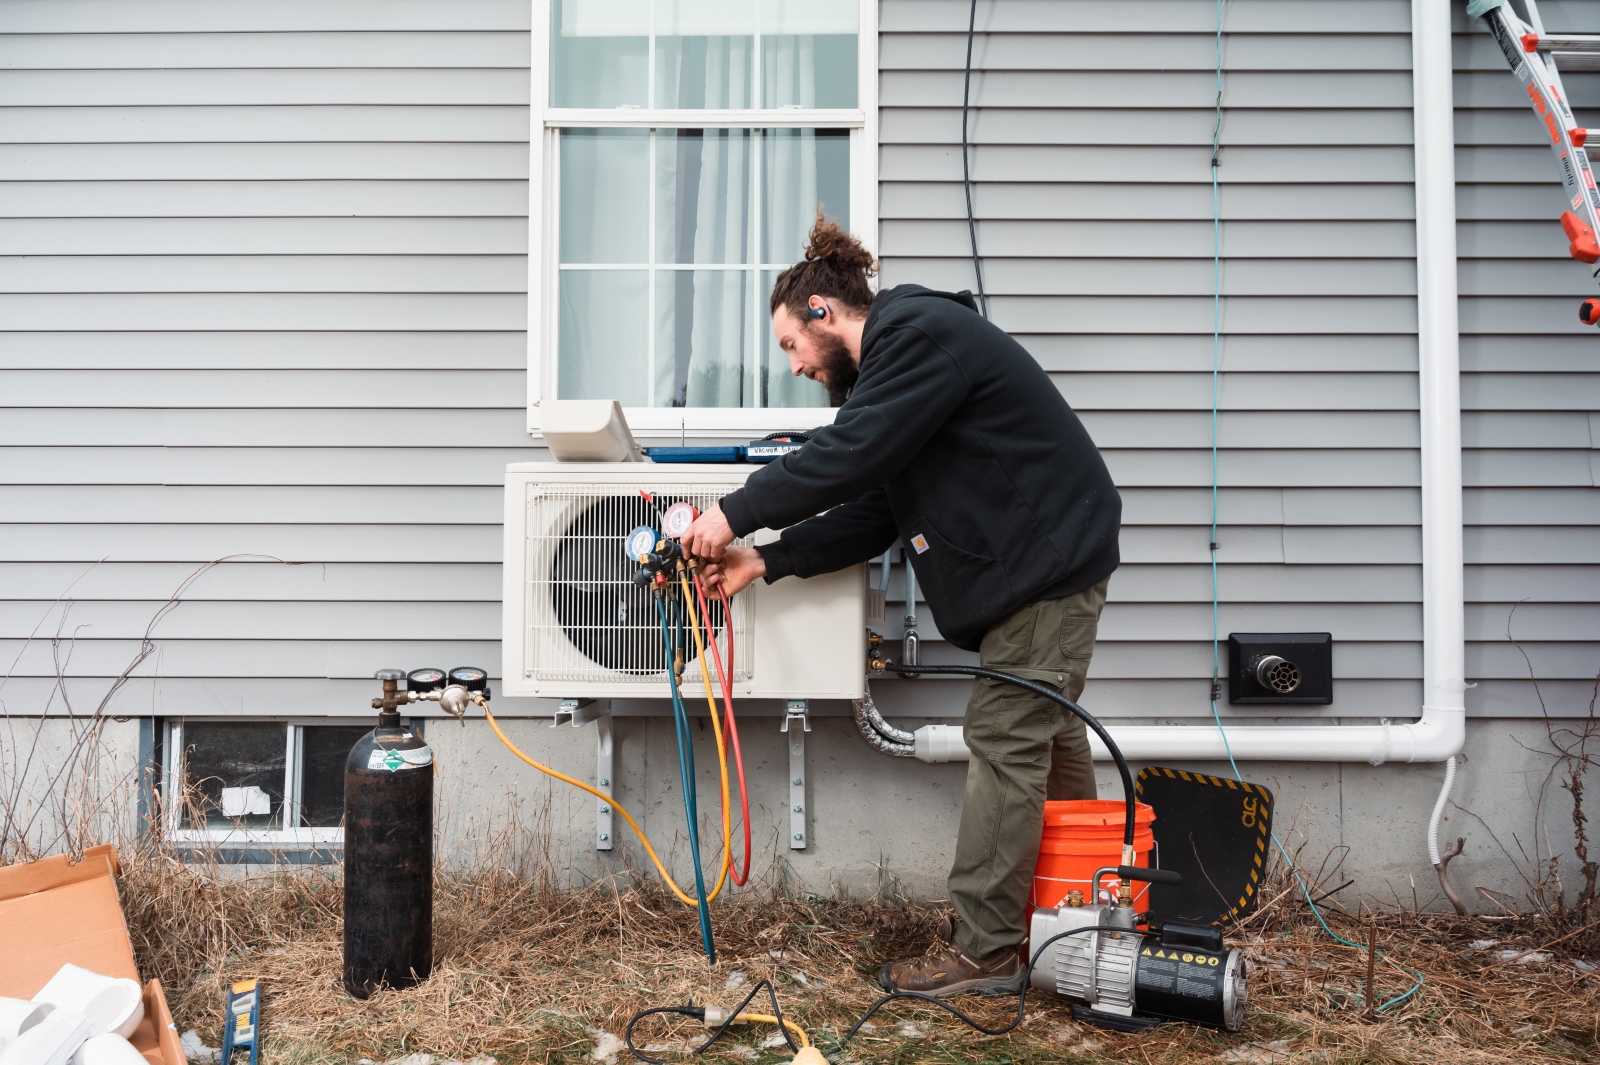 A man with a bun and a black hoodie installs a heat pump on the side of a gray house.